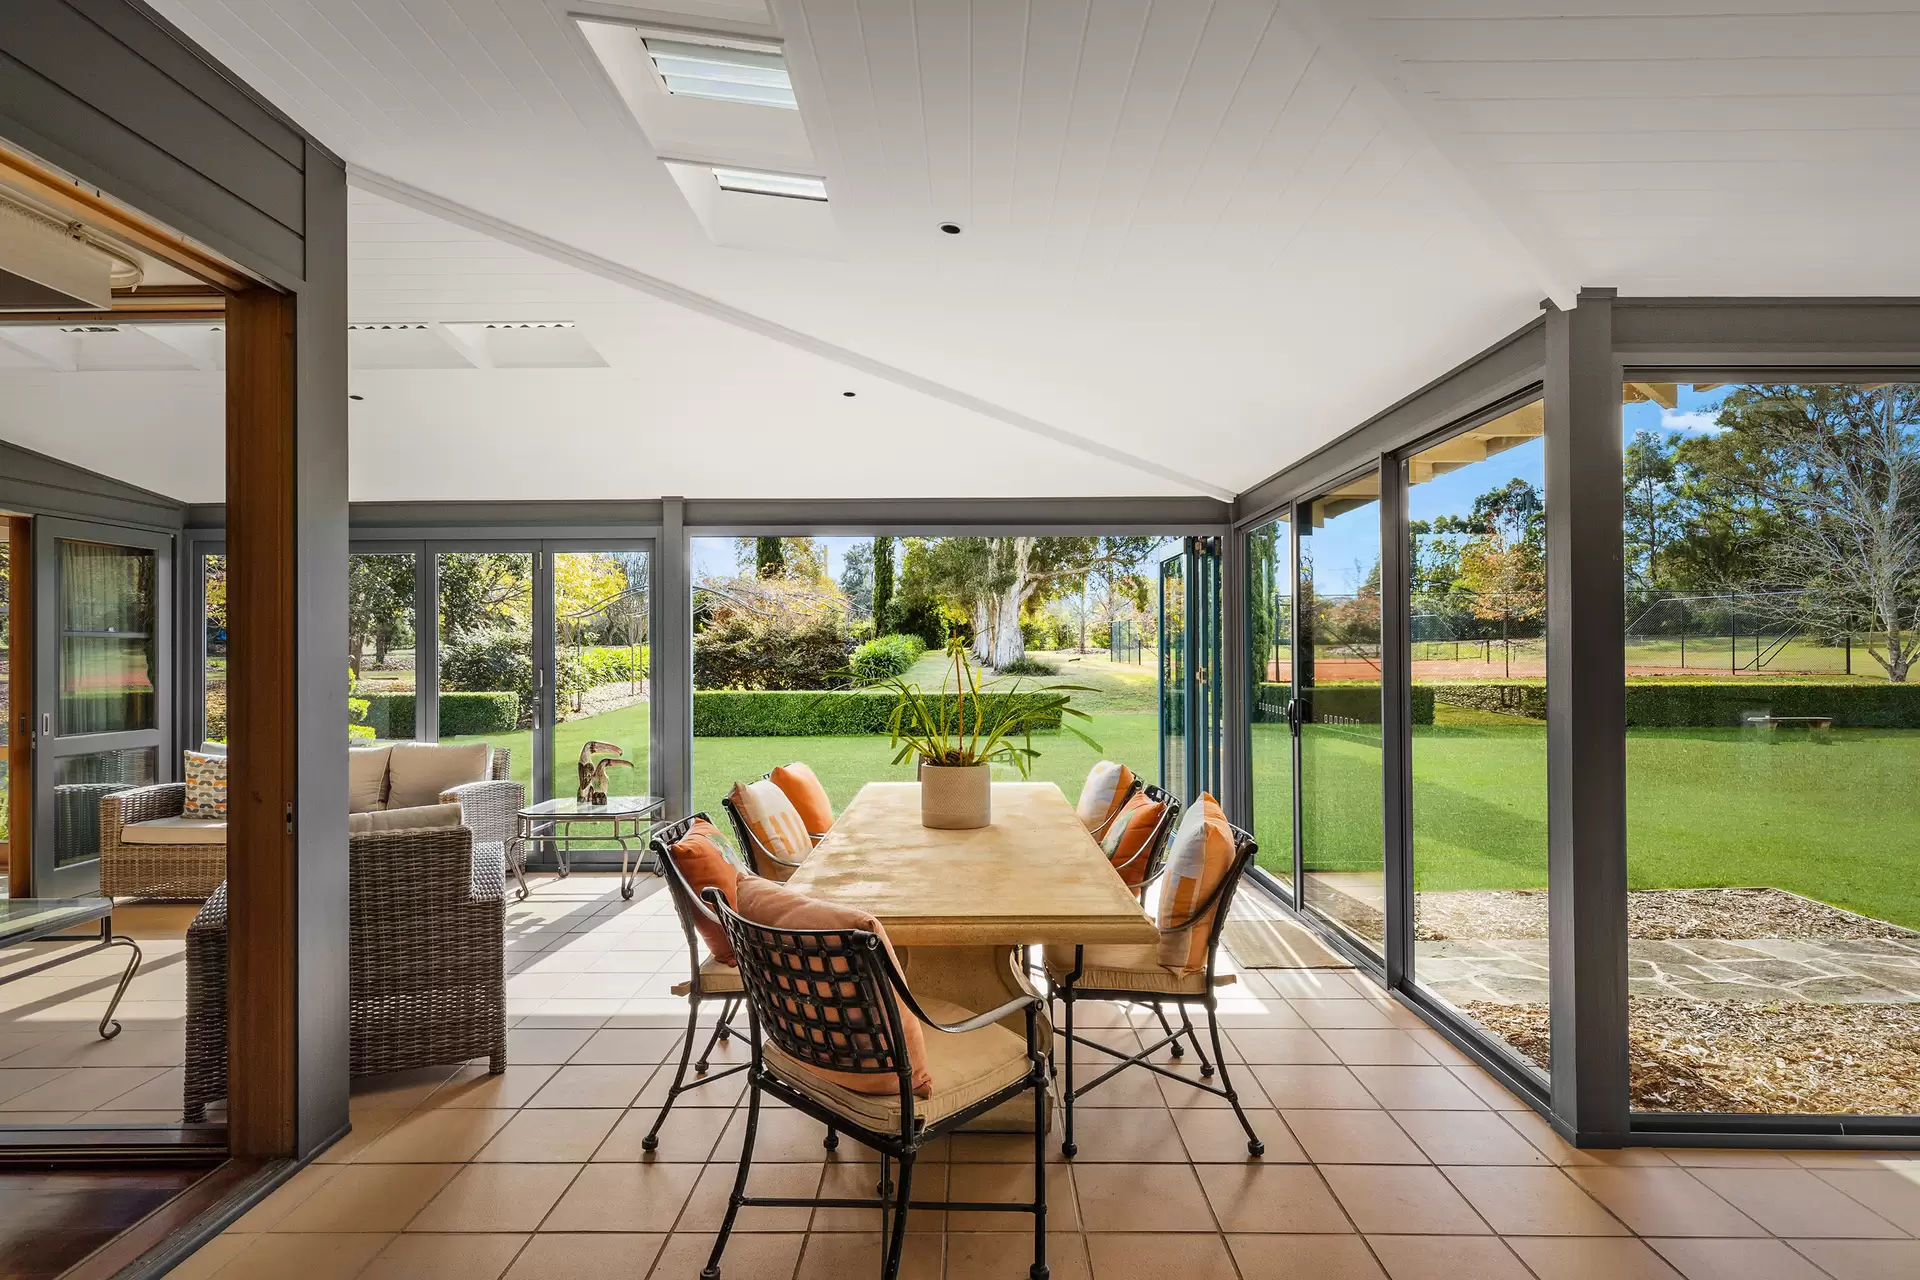 Photo #9: 5 Ascot Road, Kenthurst - For Sale by Louis Carr Real Estate